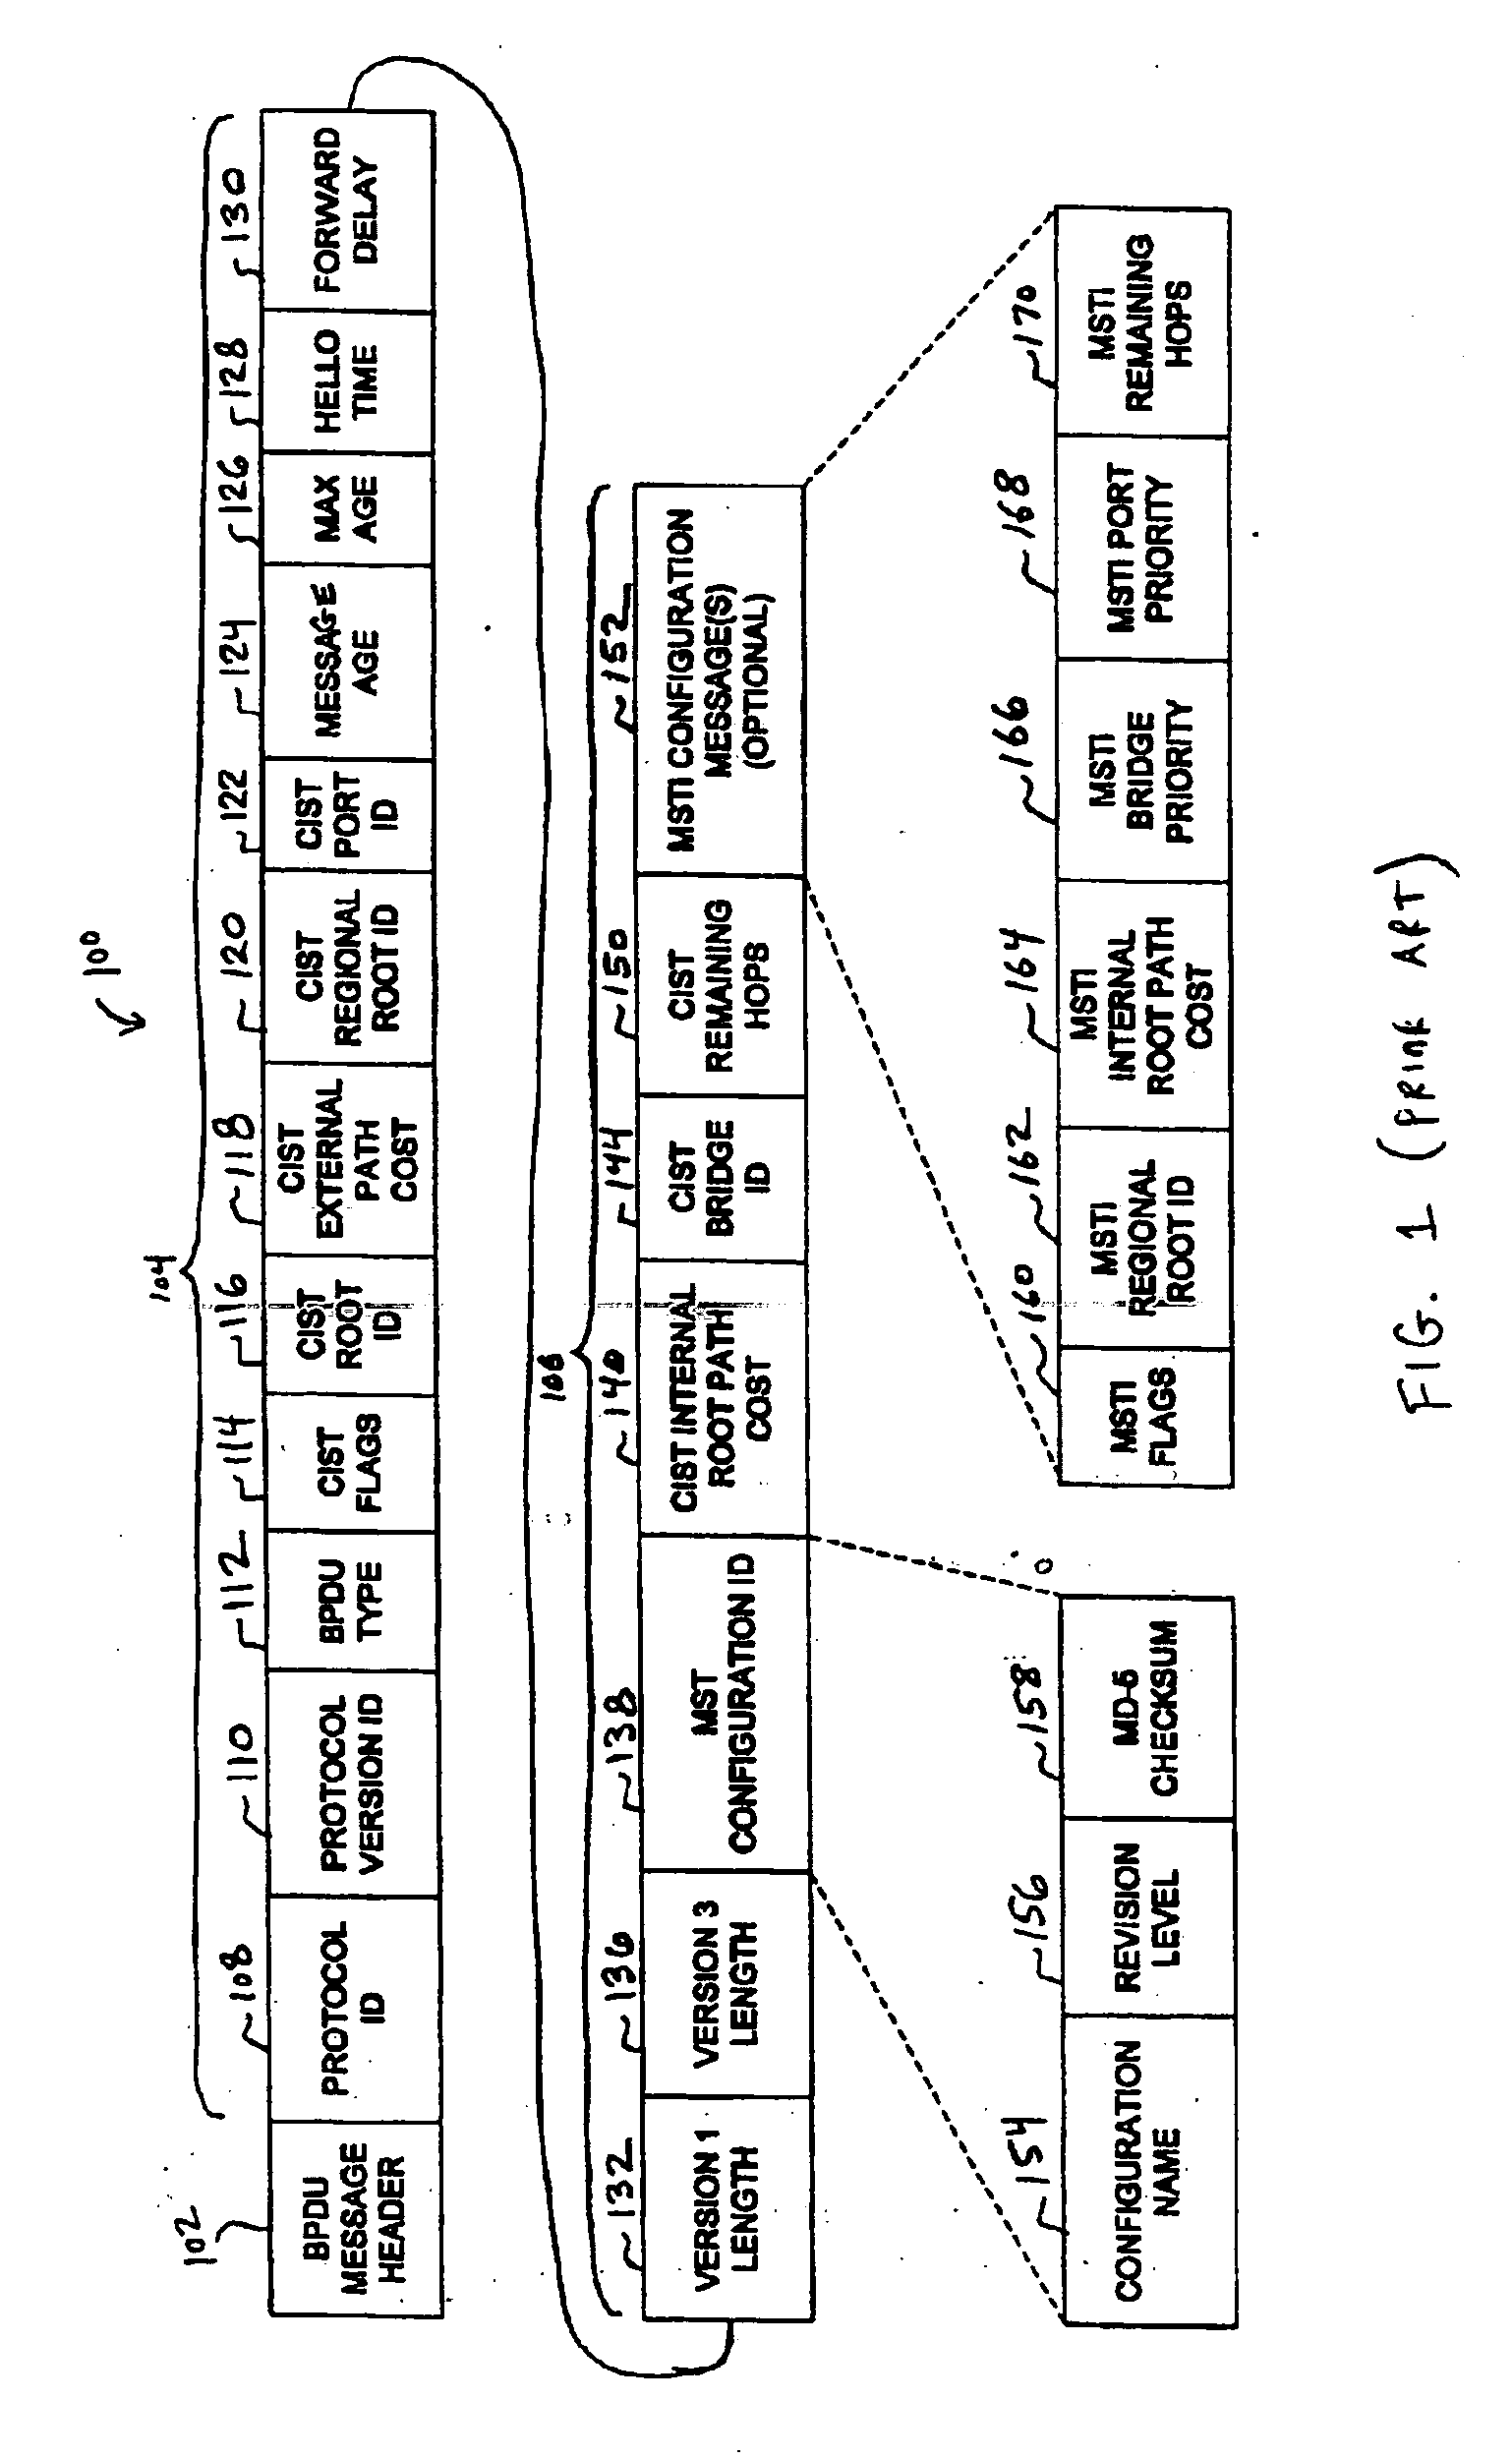 System and method for running a multiple spanning tree protocol with a very large number of domains